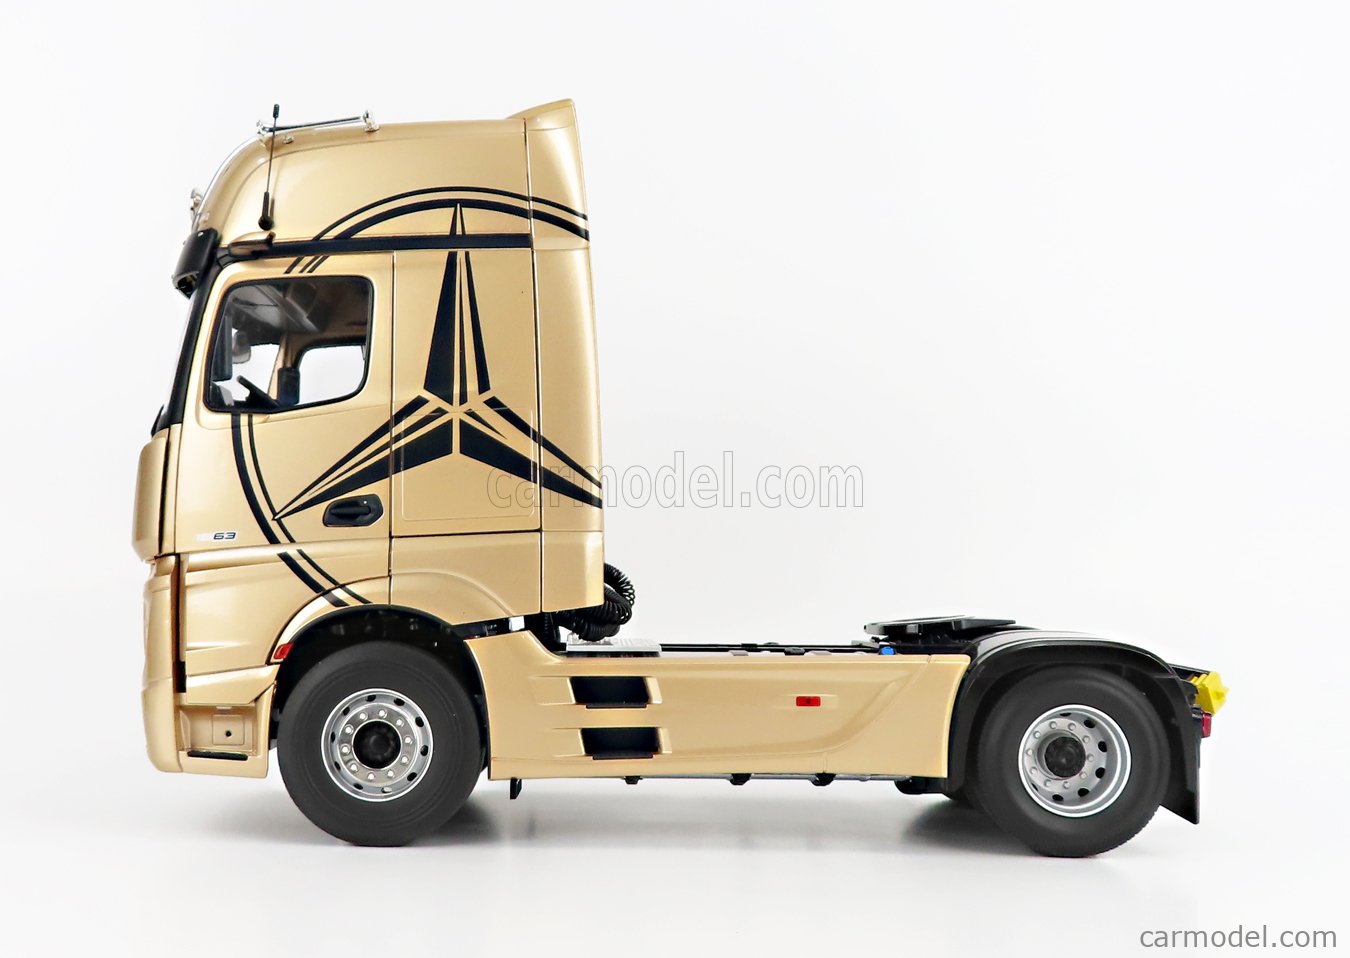 NZG LM10240066 Масштаб 1/18  MERCEDES BENZ ACTROS 2 1863 GIGASPACE 4x2 MIRRORCAM TRACTOR TRUCK LOGO MERCEDES 2-ASSI 2018 CHAMPAGNE